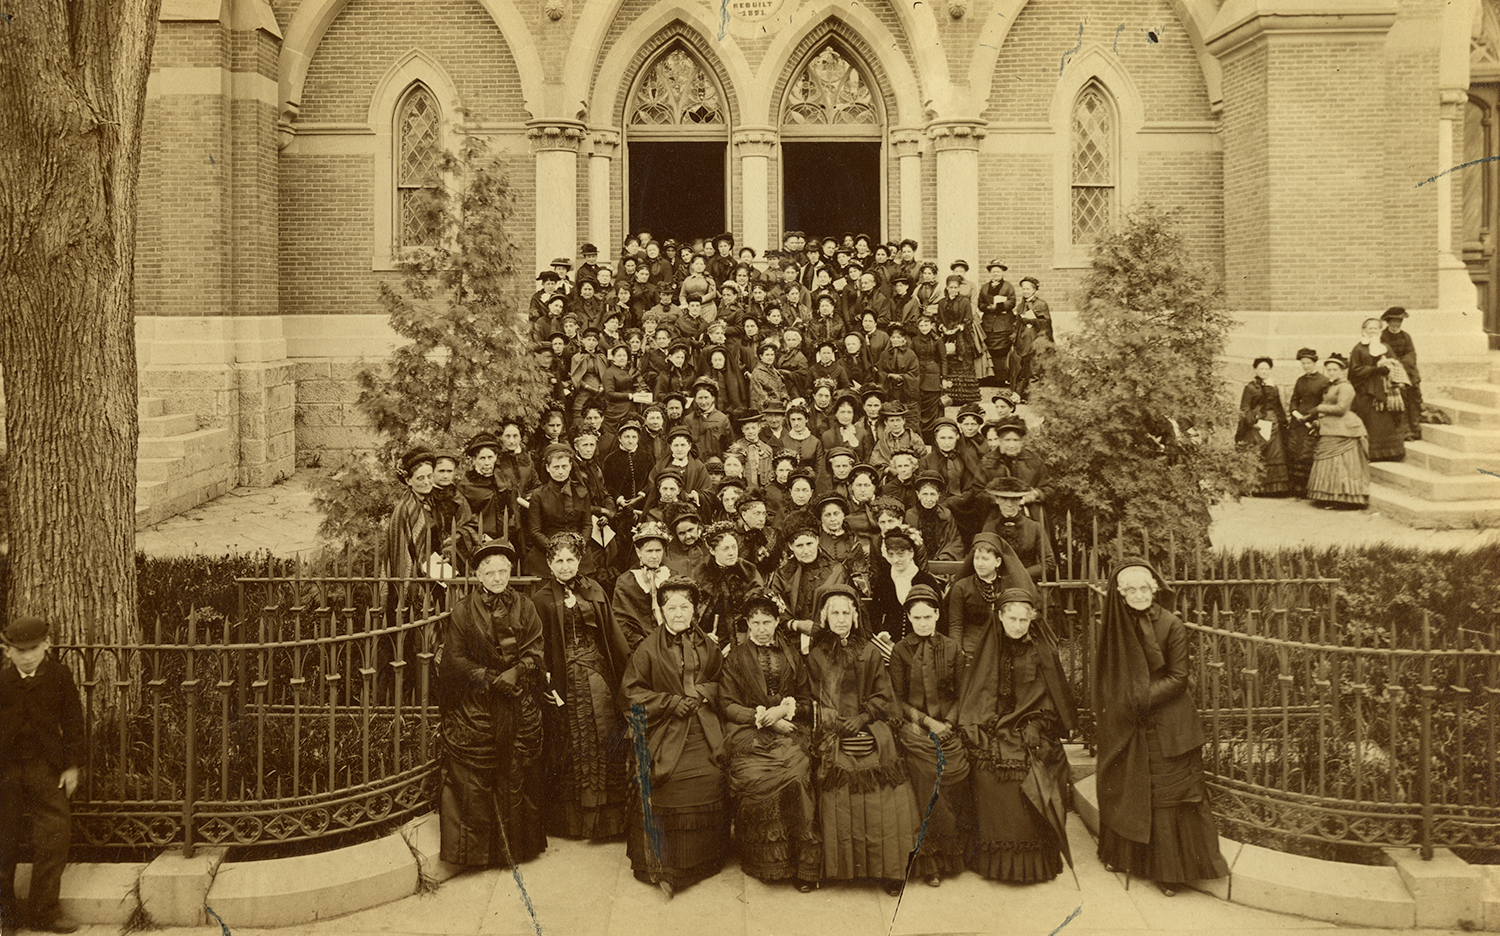 “GA 1879”: Who paid for this gathering? PCUSA Women’s Foreign Missionary Society at the 1879 General Assembly in Saratoga, New York.